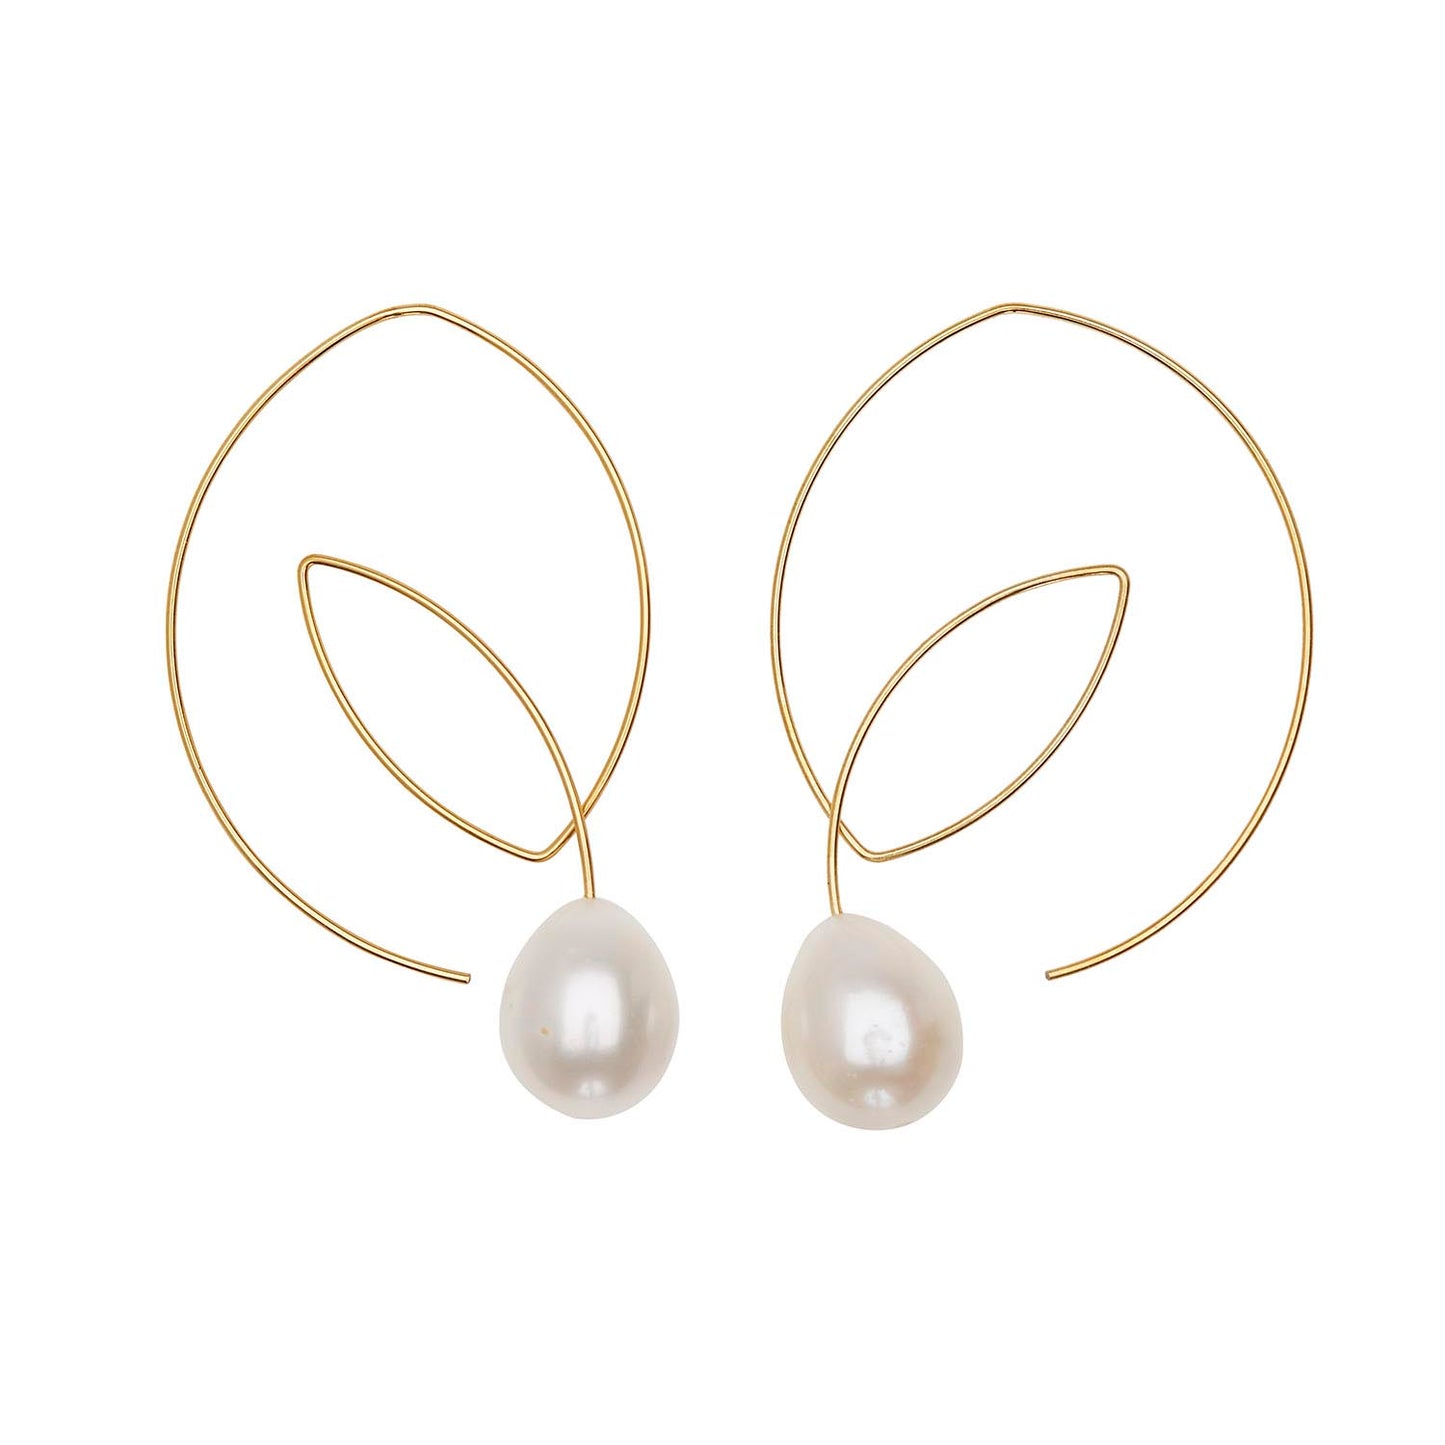 Large Angled Loop Earrings with White Drop Pearls